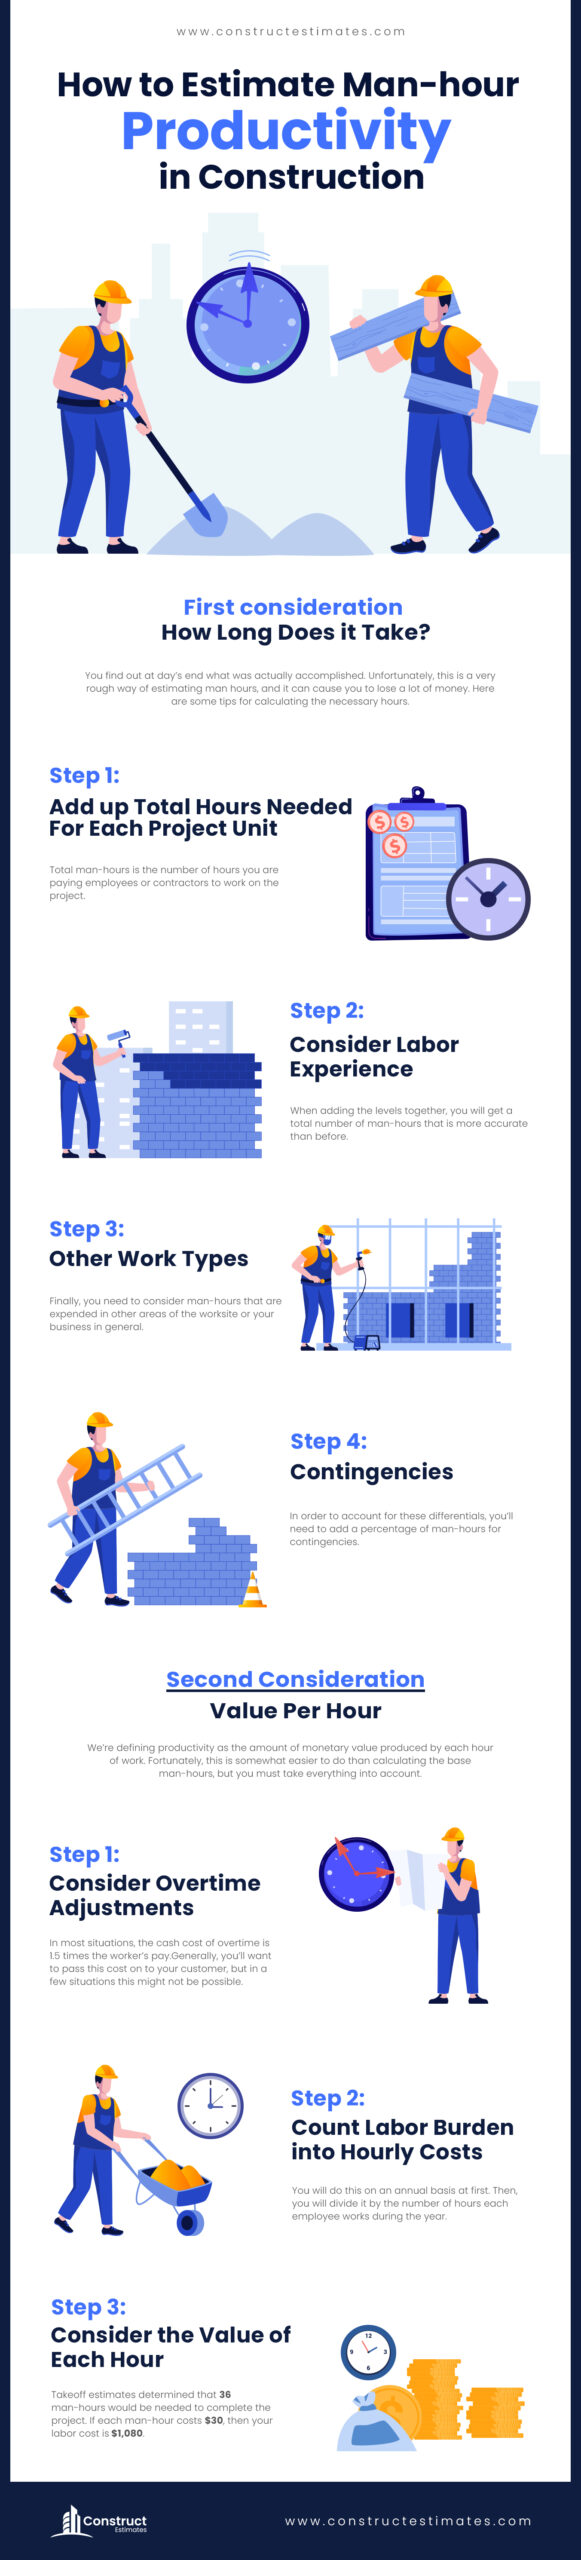 How to Estimate Man-hour Productivity in Construction